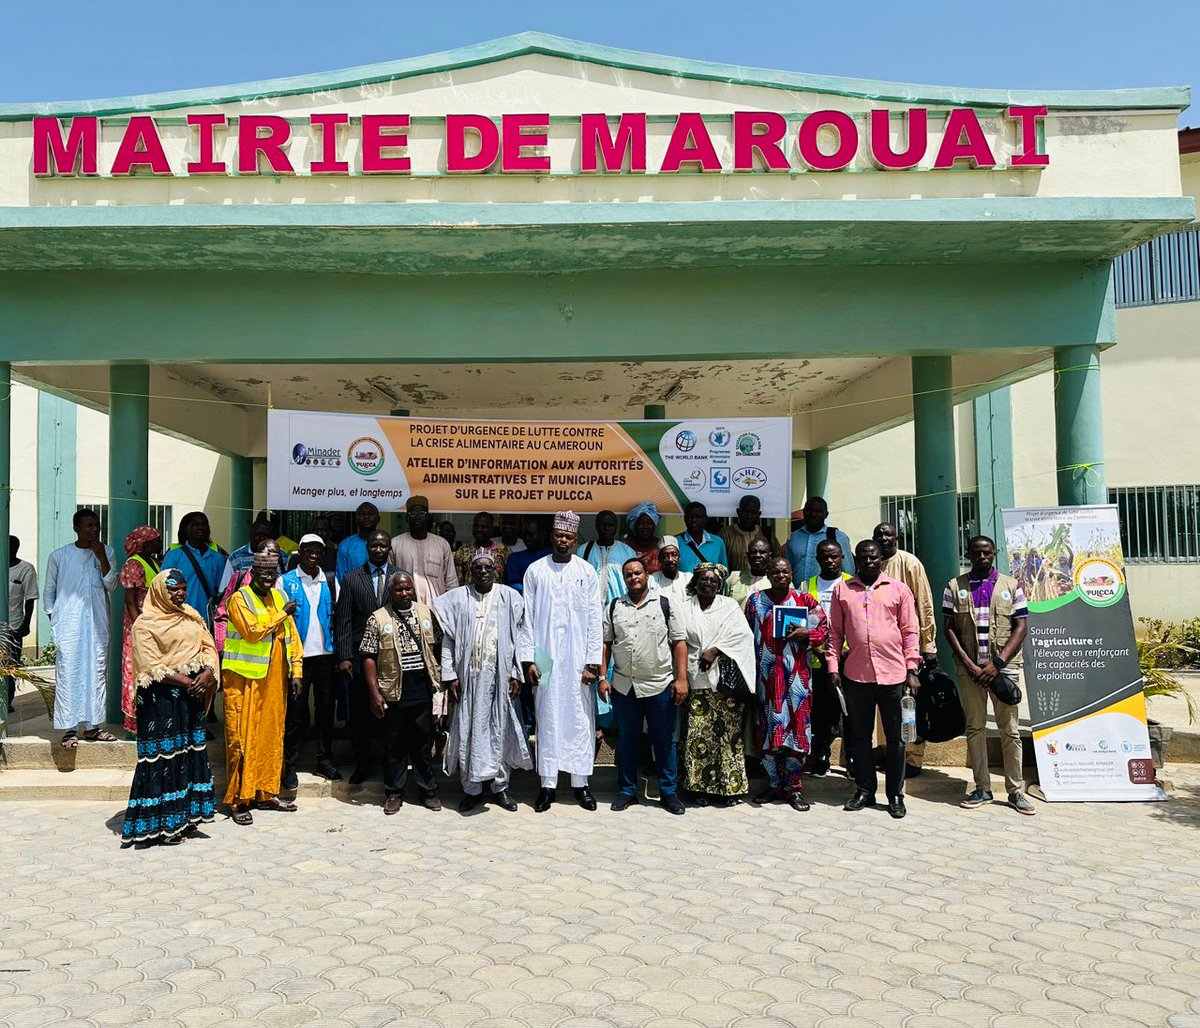 #Cameroon🇨🇲 All hands on deck🤝to ending food crisis in Cameroon Insightful discussions and updates shared at the information session with local authorities in Diamare division on the implementation of @WFP’s #PULCCA activities in #FarNorth🇨🇲. #SavingLives #FoodSecurity